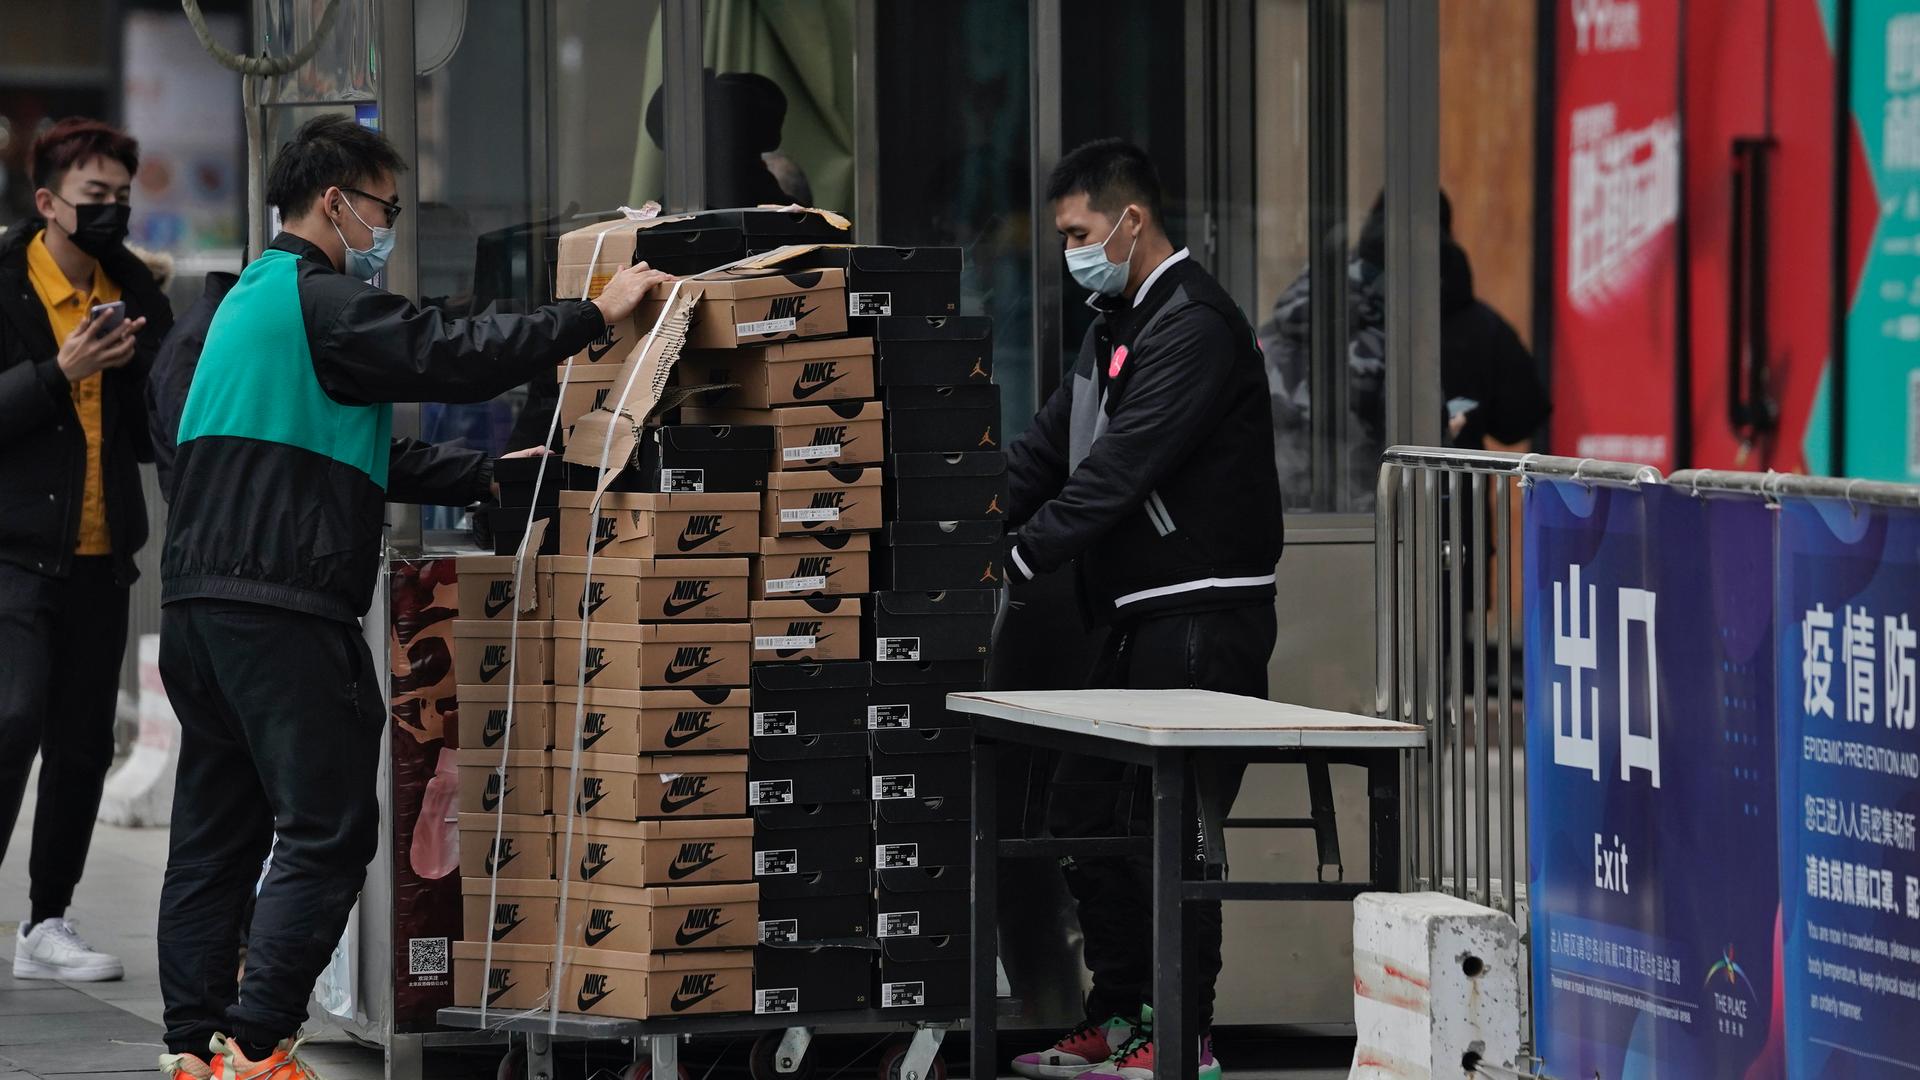 Workers wearing face masks to help curb the spread of the coronavirus push a cart loaded with shoes made by Nike past a security post at a shopping mall in Beijing, Jan. 14, 2021. China's exports rose in 2020 despite pressure from the coronavirus pandemic